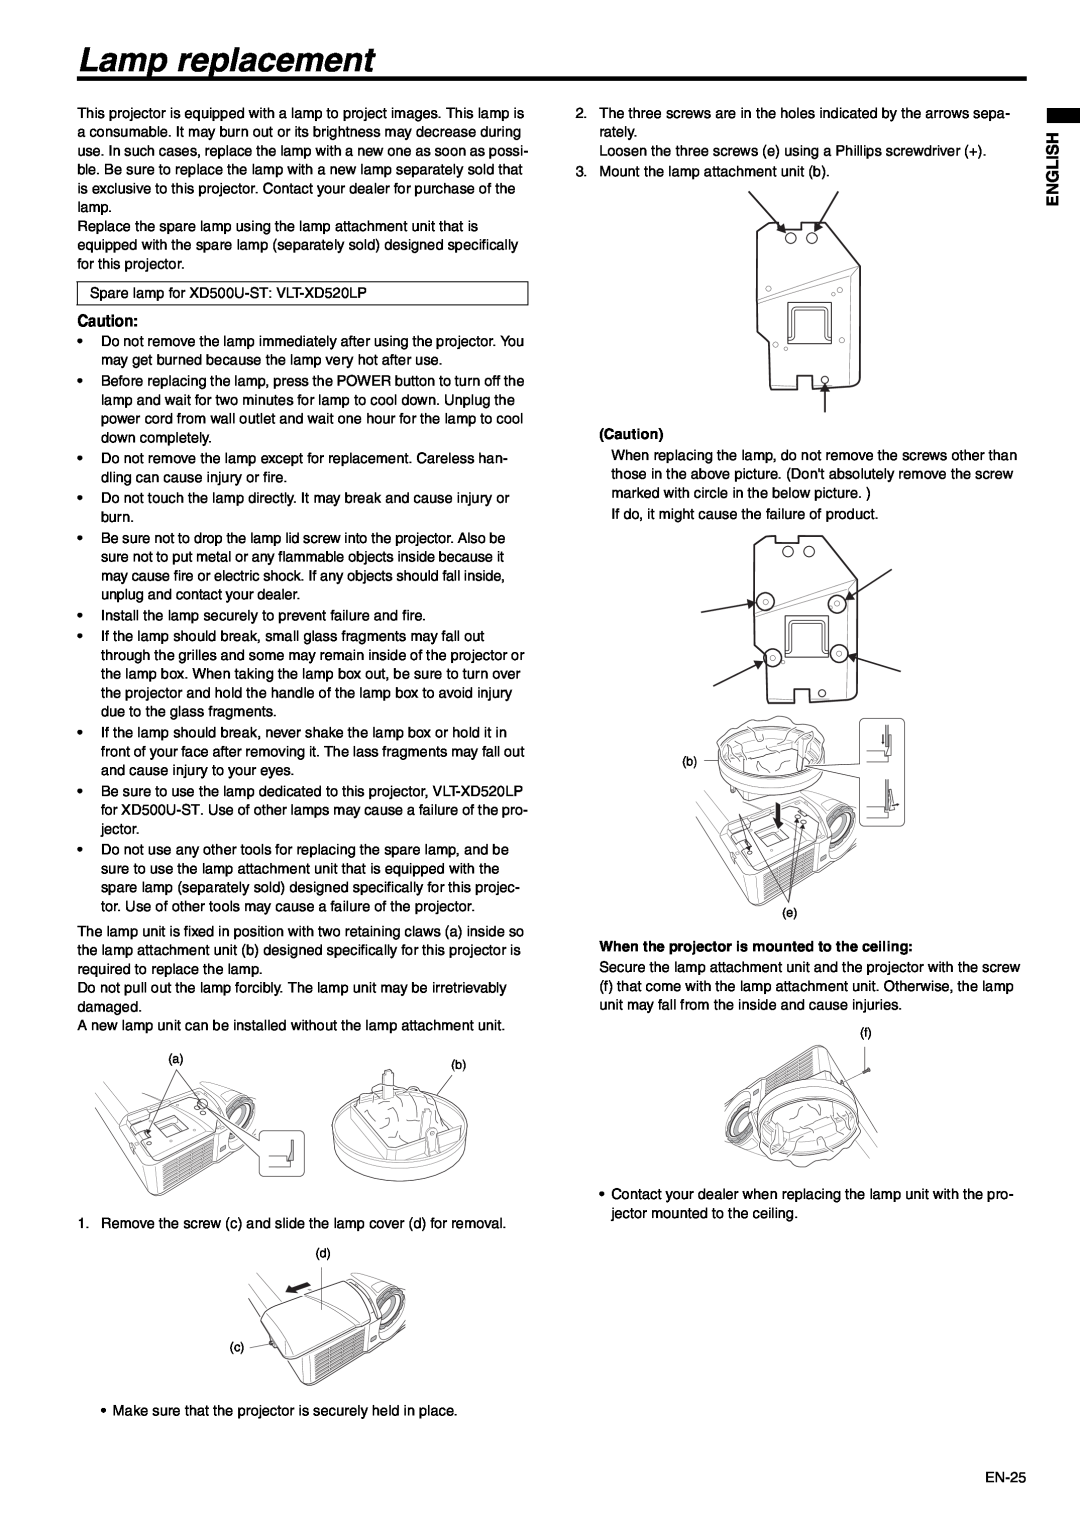 Mitsubishi Electronics XD500U-ST user manual Lamp replacement, English, When the projector is mounted to the ceiling 